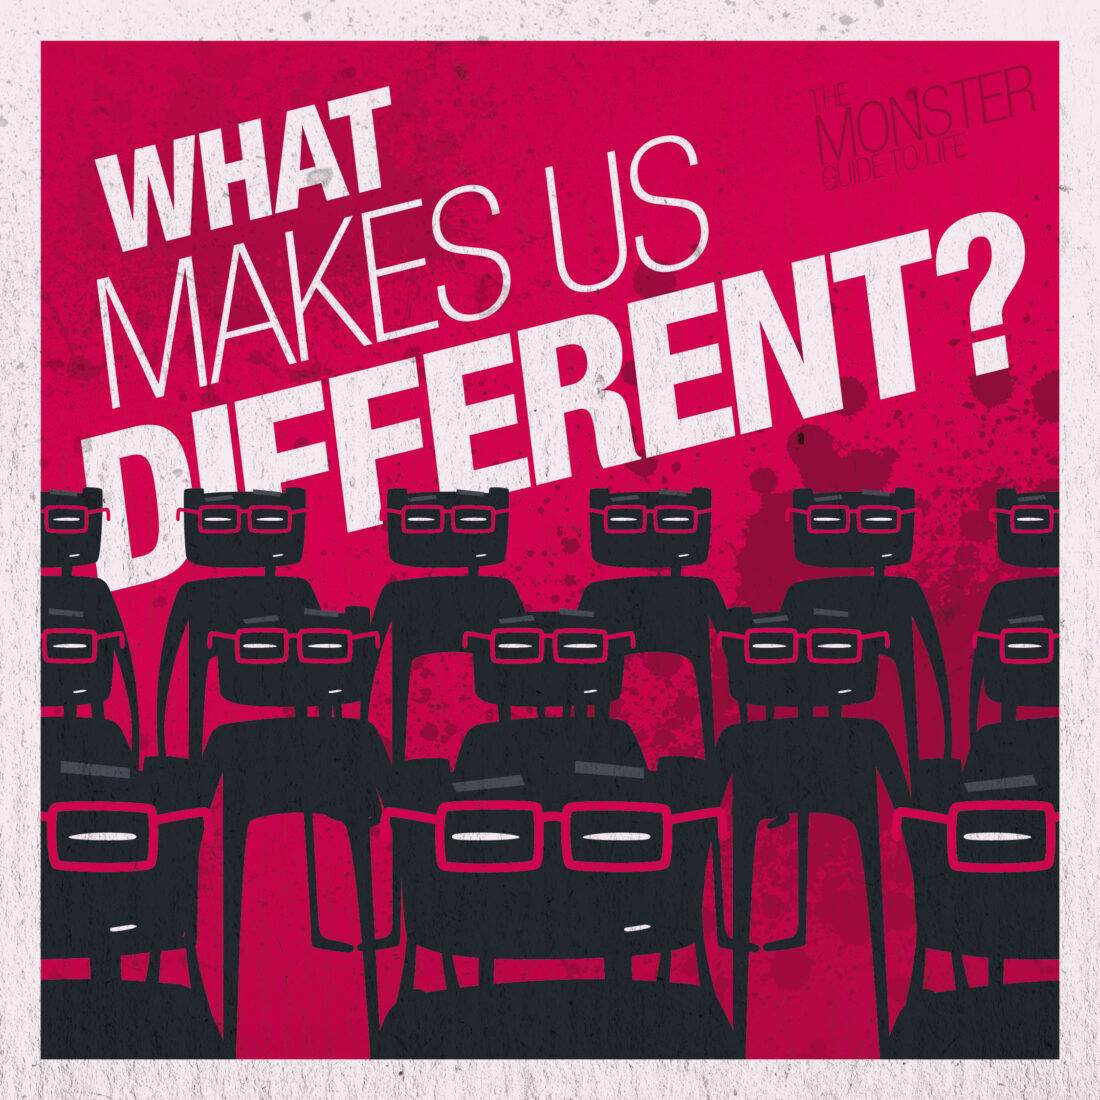 What makes us different?